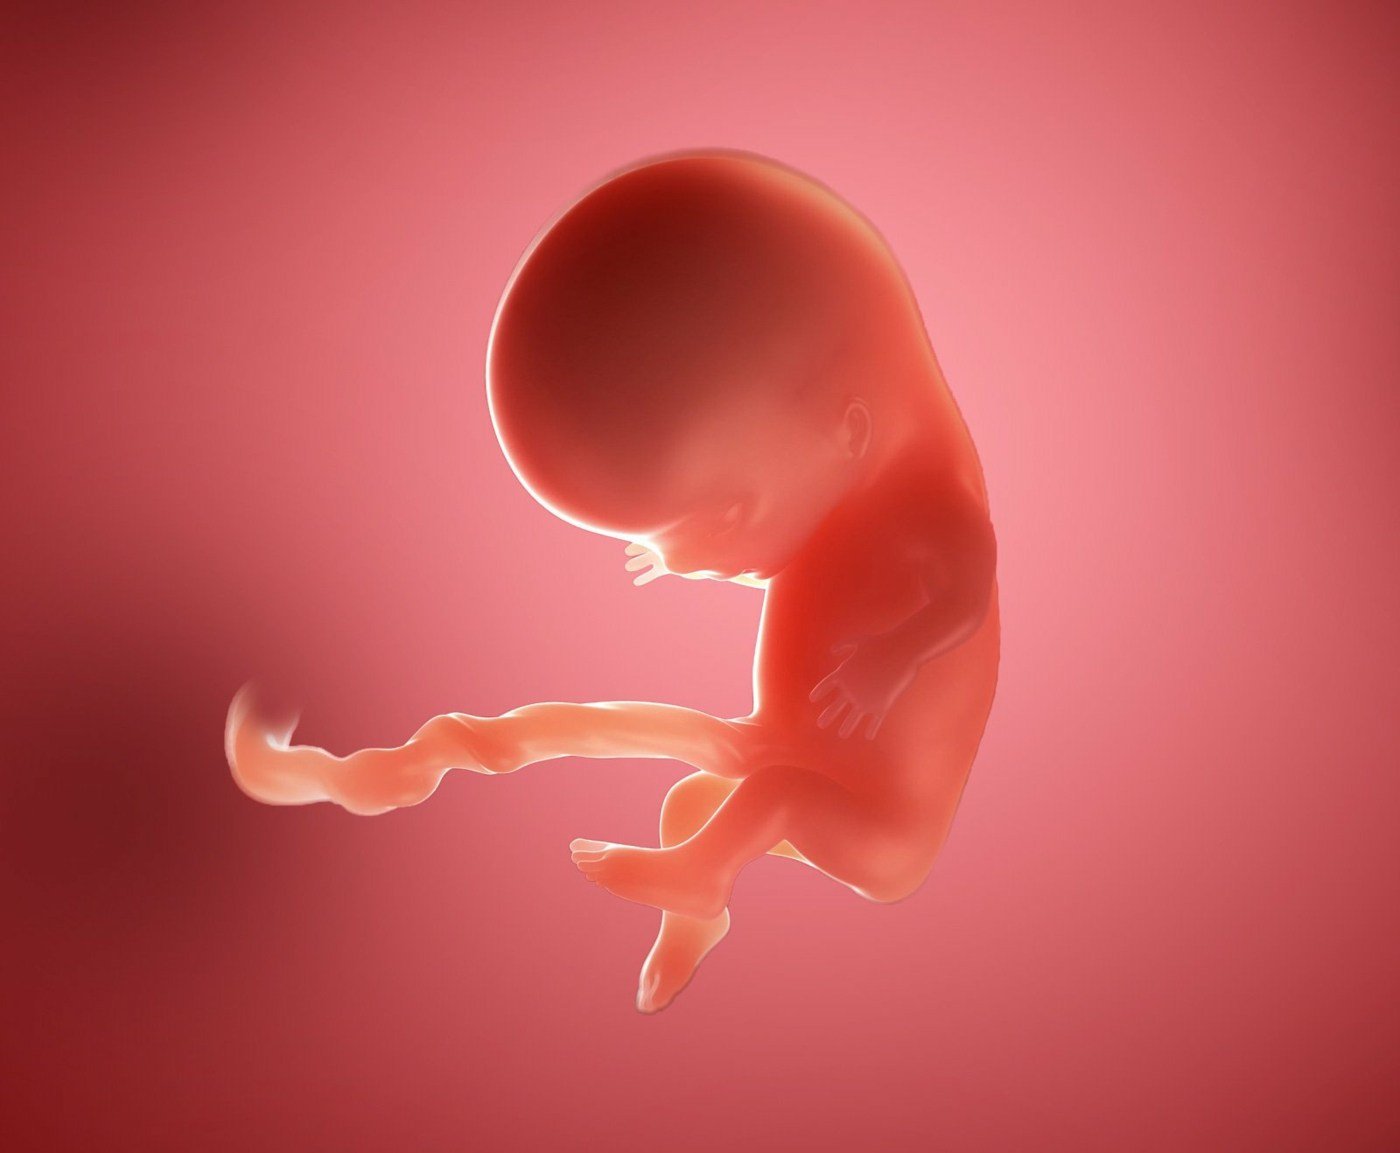 Development of the fetus and embryo with 10 weeks - arms and legs are developed